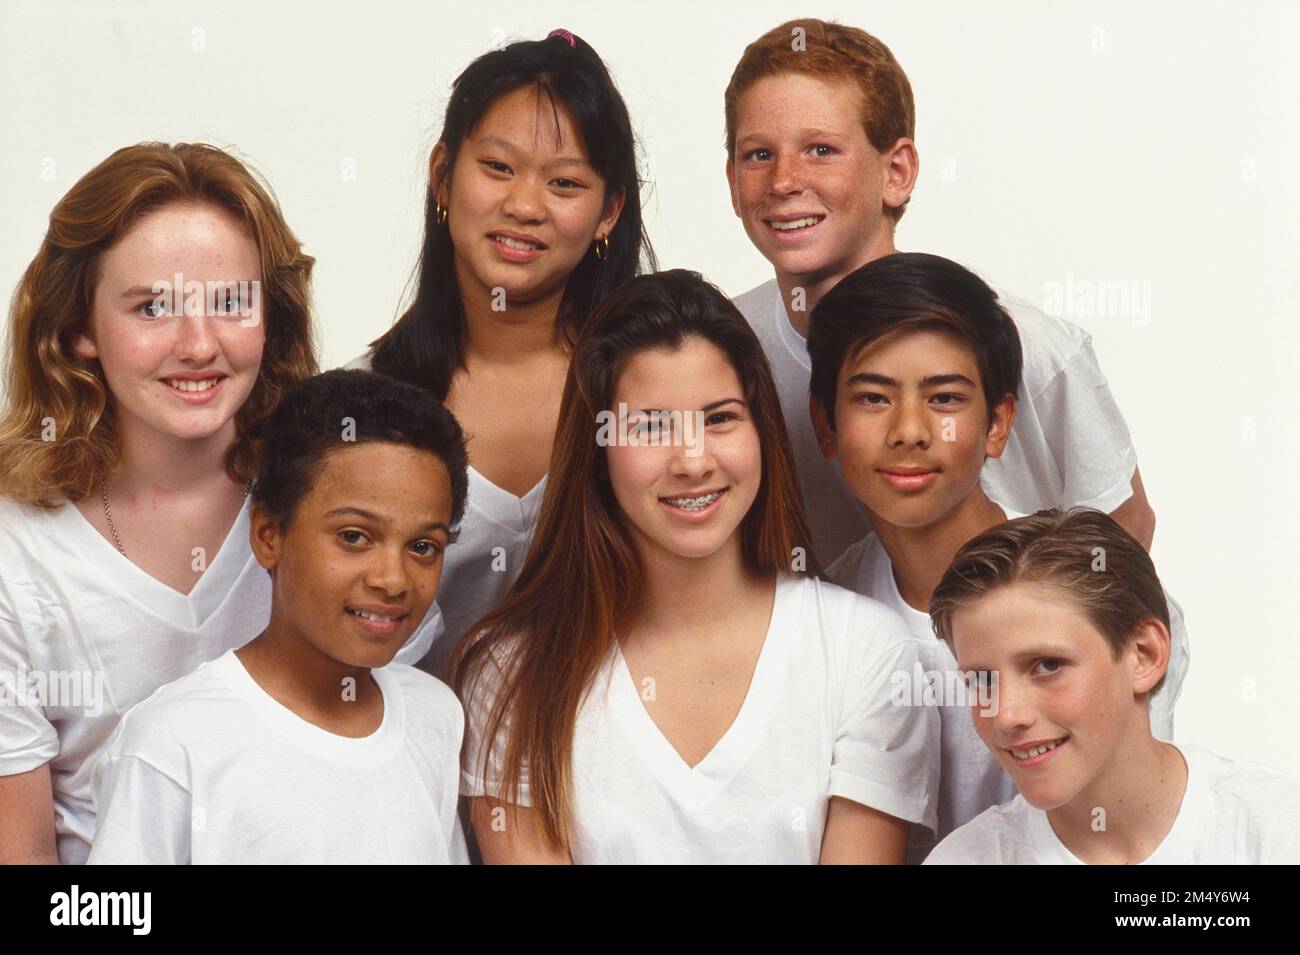 Group of 7 teens all in white t-shirts posing for a picture Stock Photo